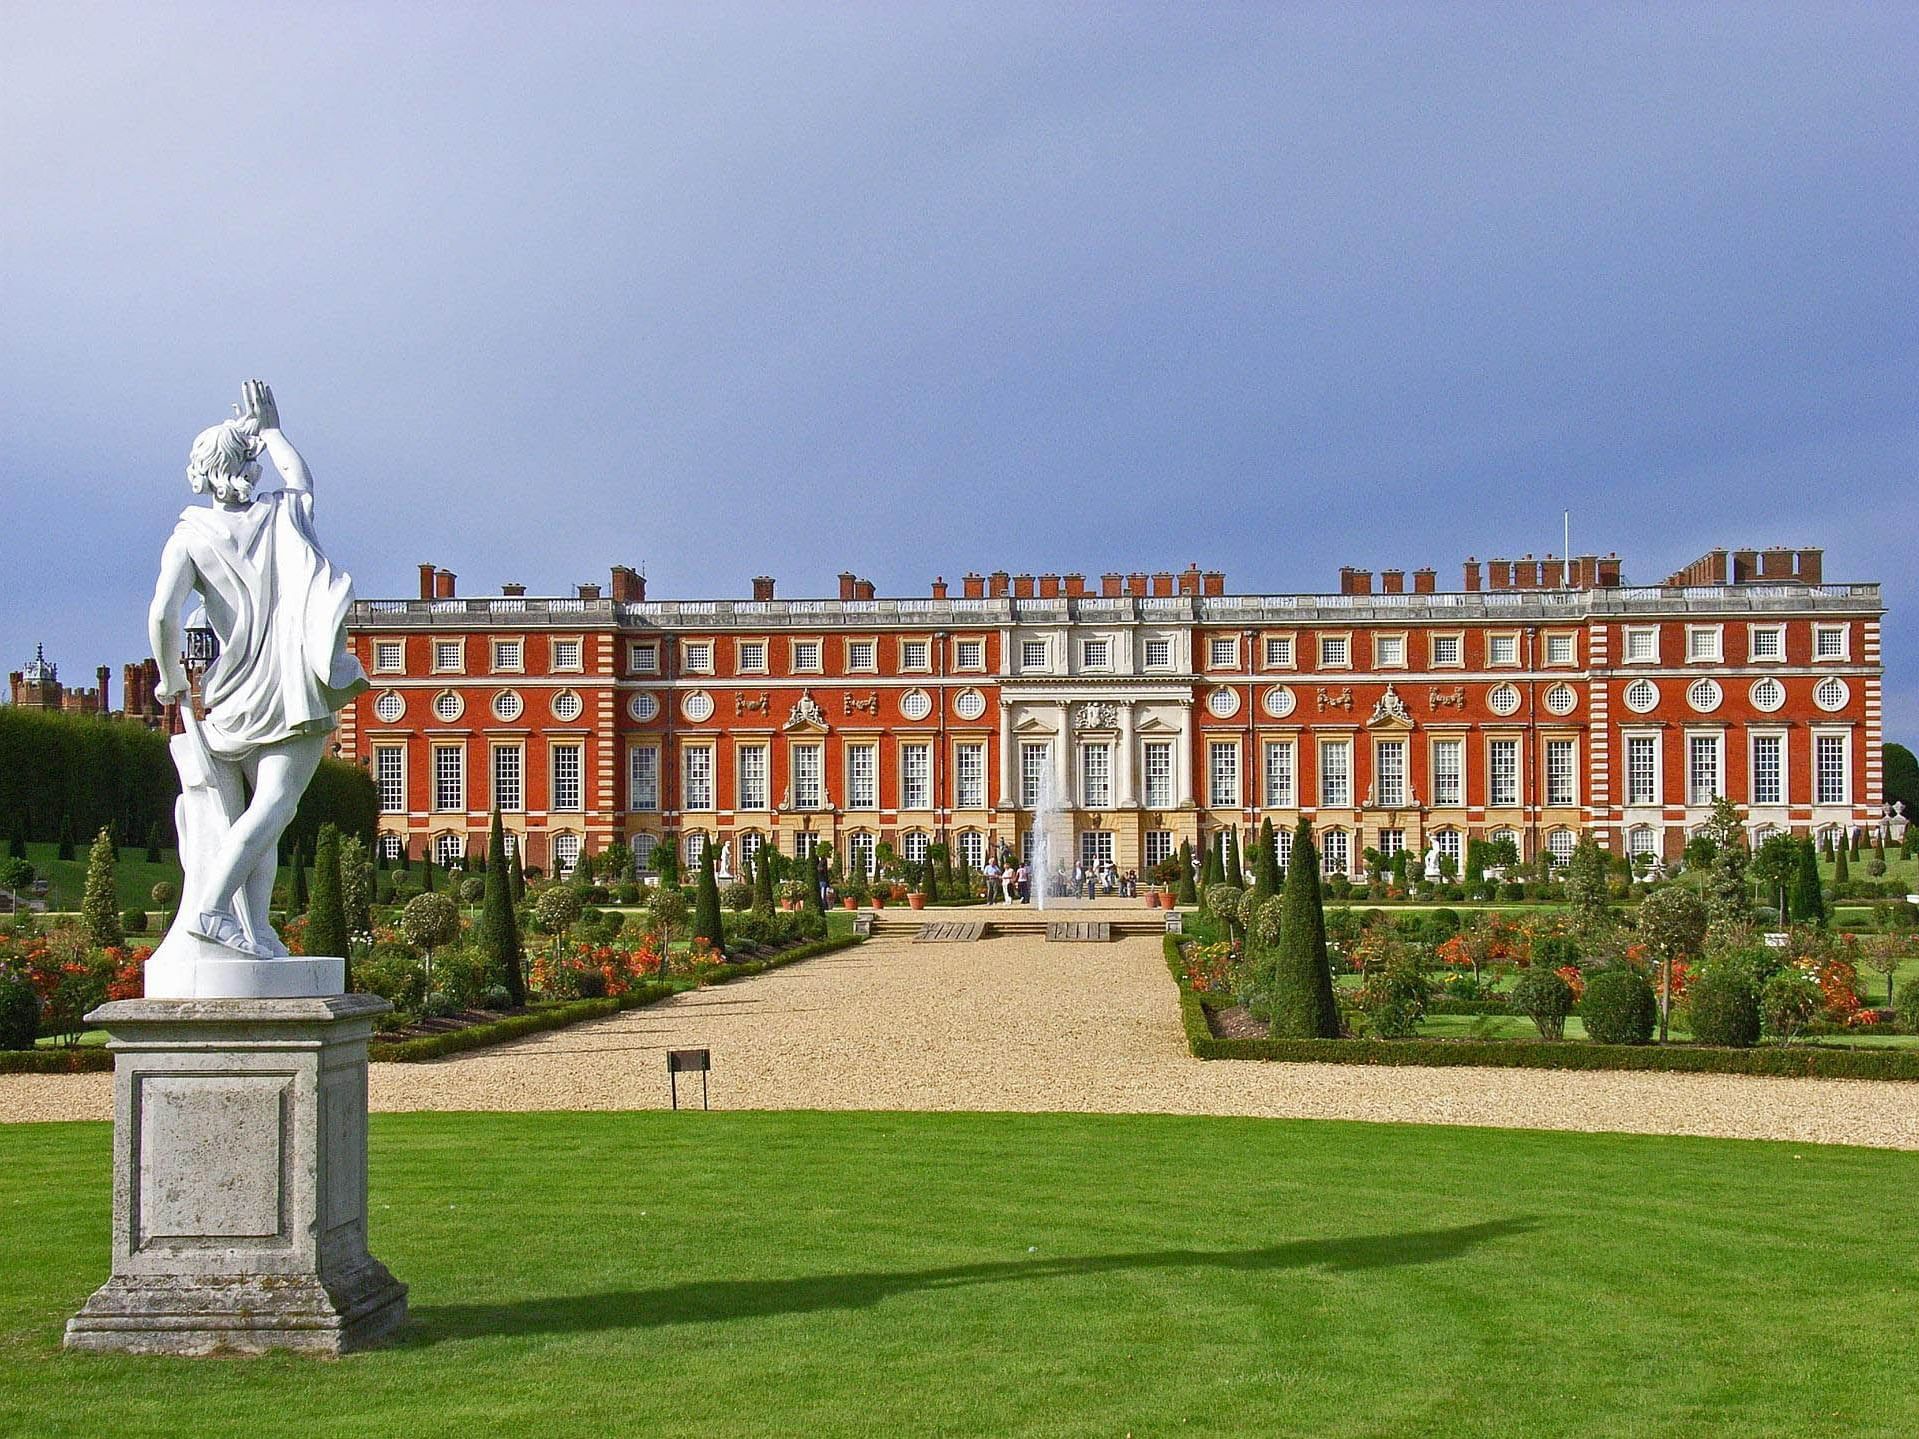 A Sculpture in front of a Palace near The Selwyn Richmond